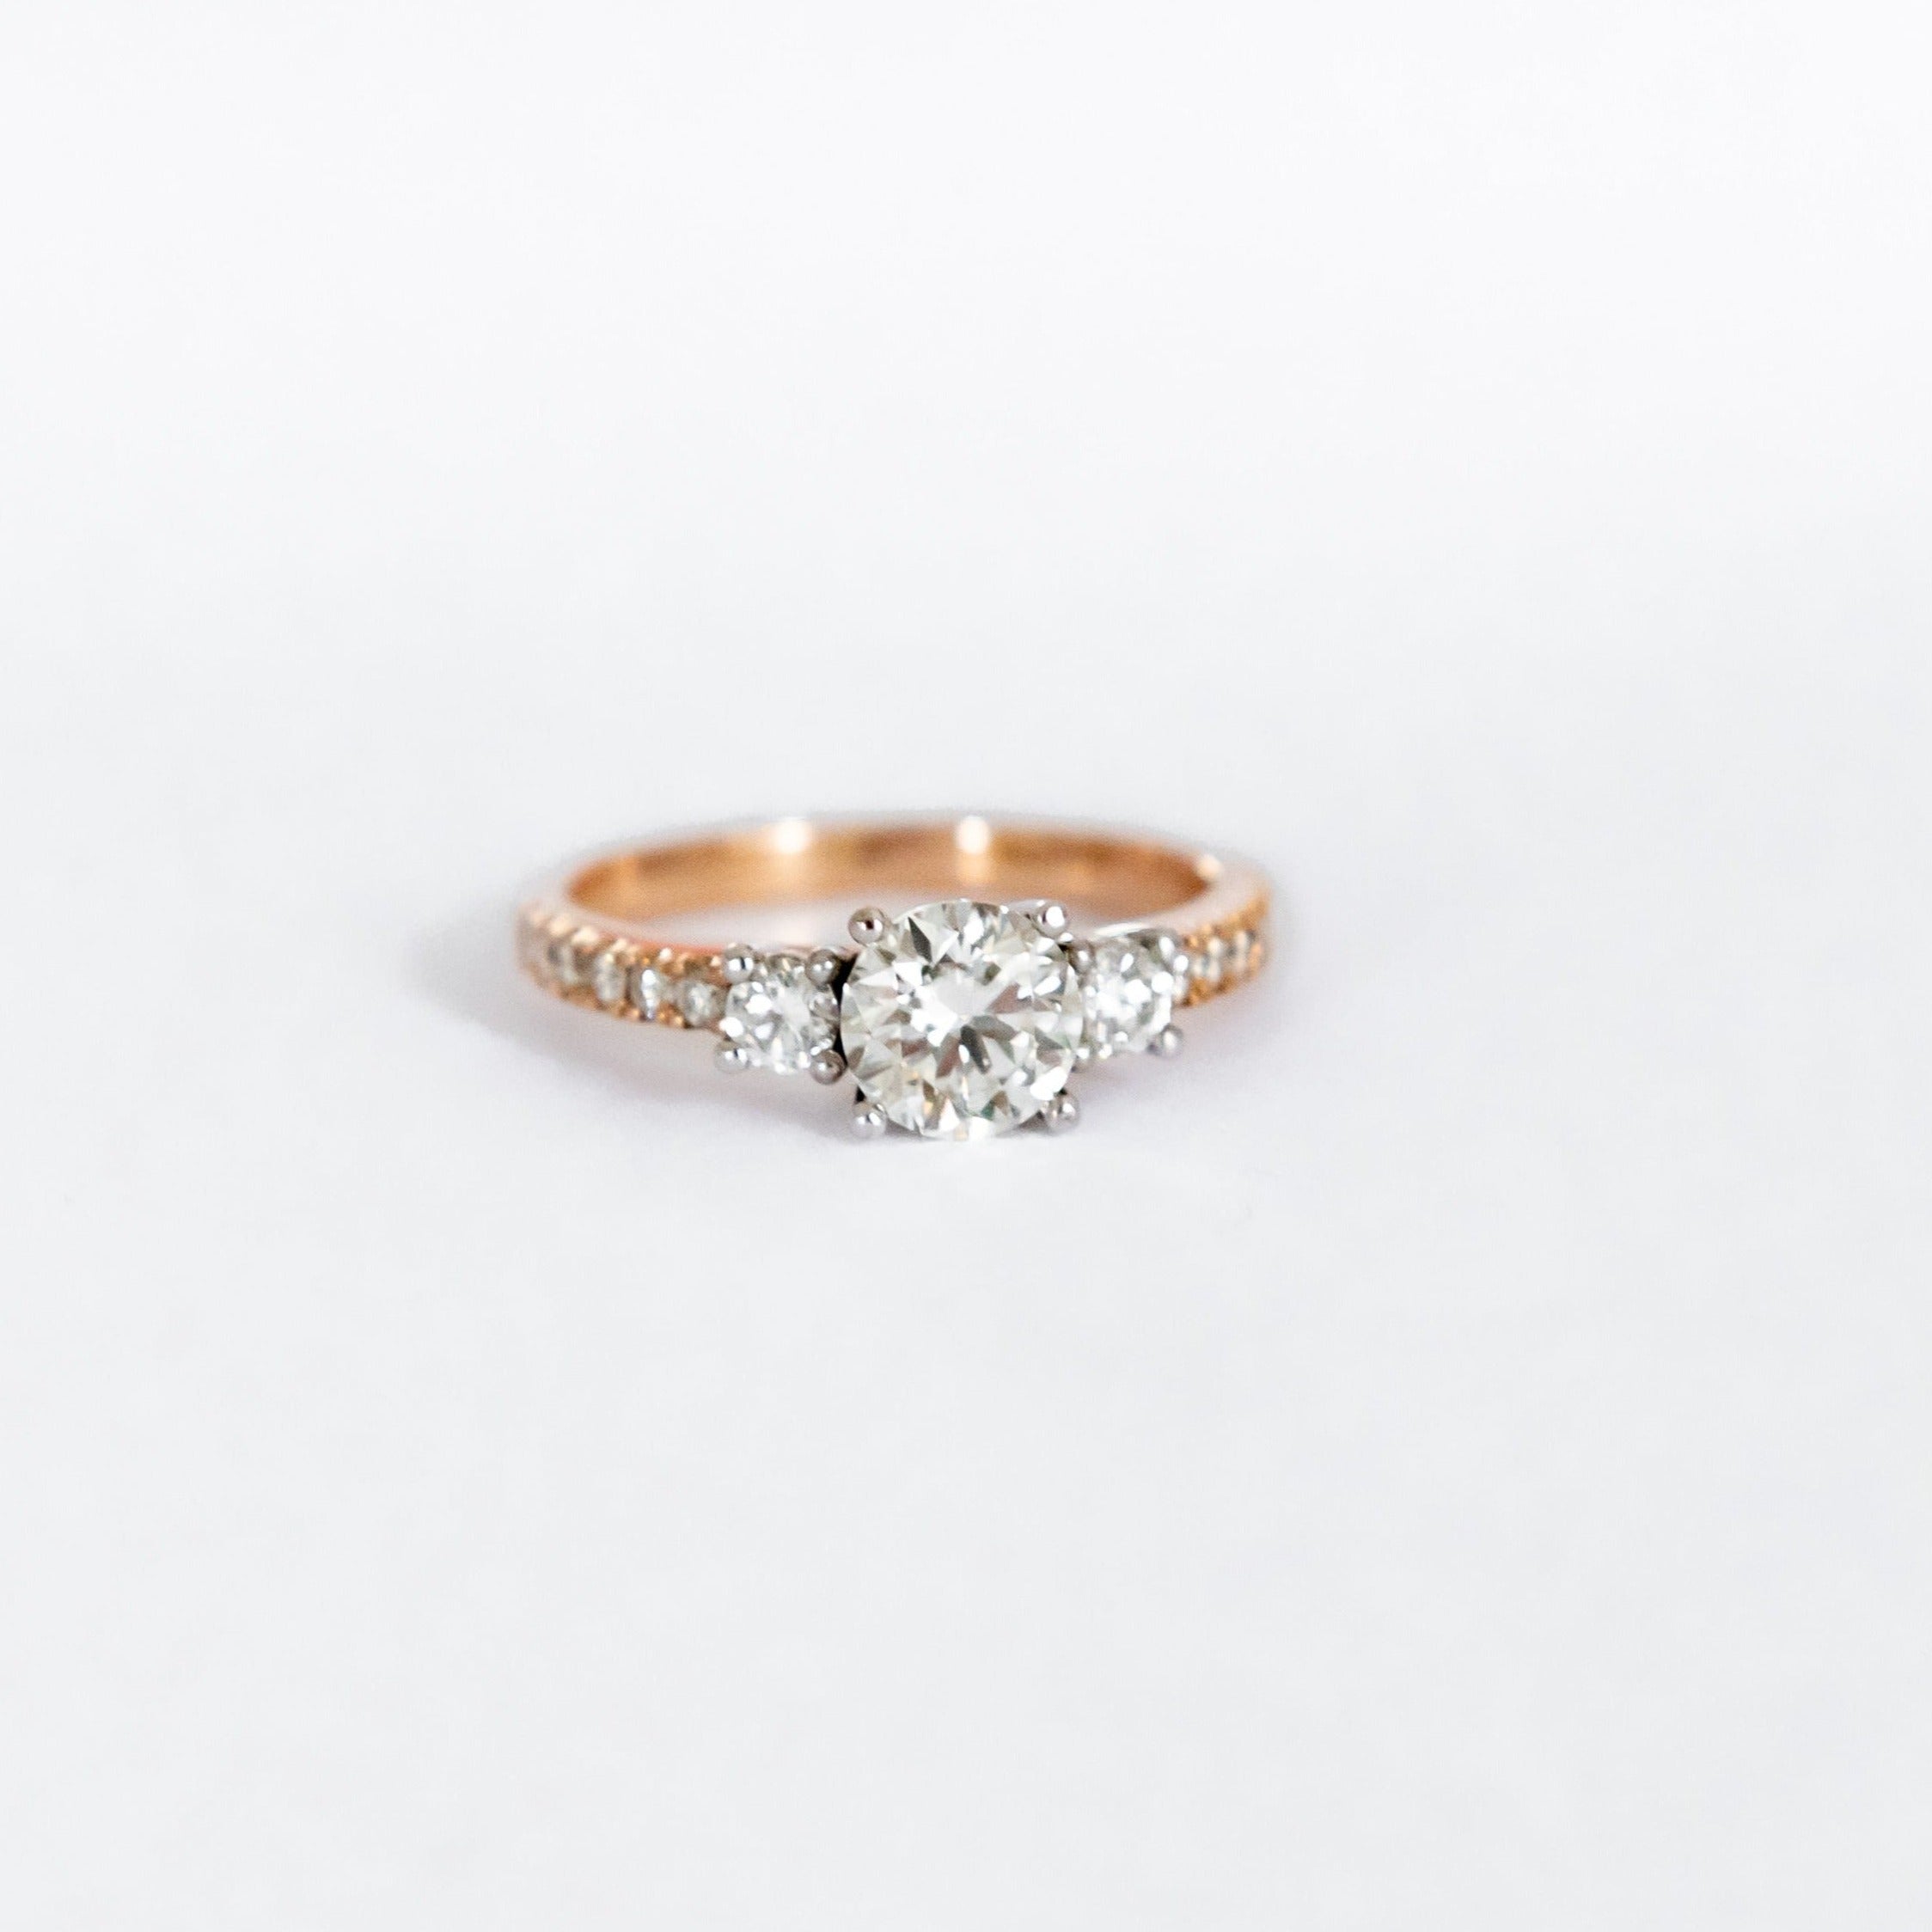 18ct rose gold ring with a 1.02ct round brilliant cut diamond as the centre stone. Two diamonds equalling 0,21ct make up this trilogy in a band of 0,018ct diamonds.